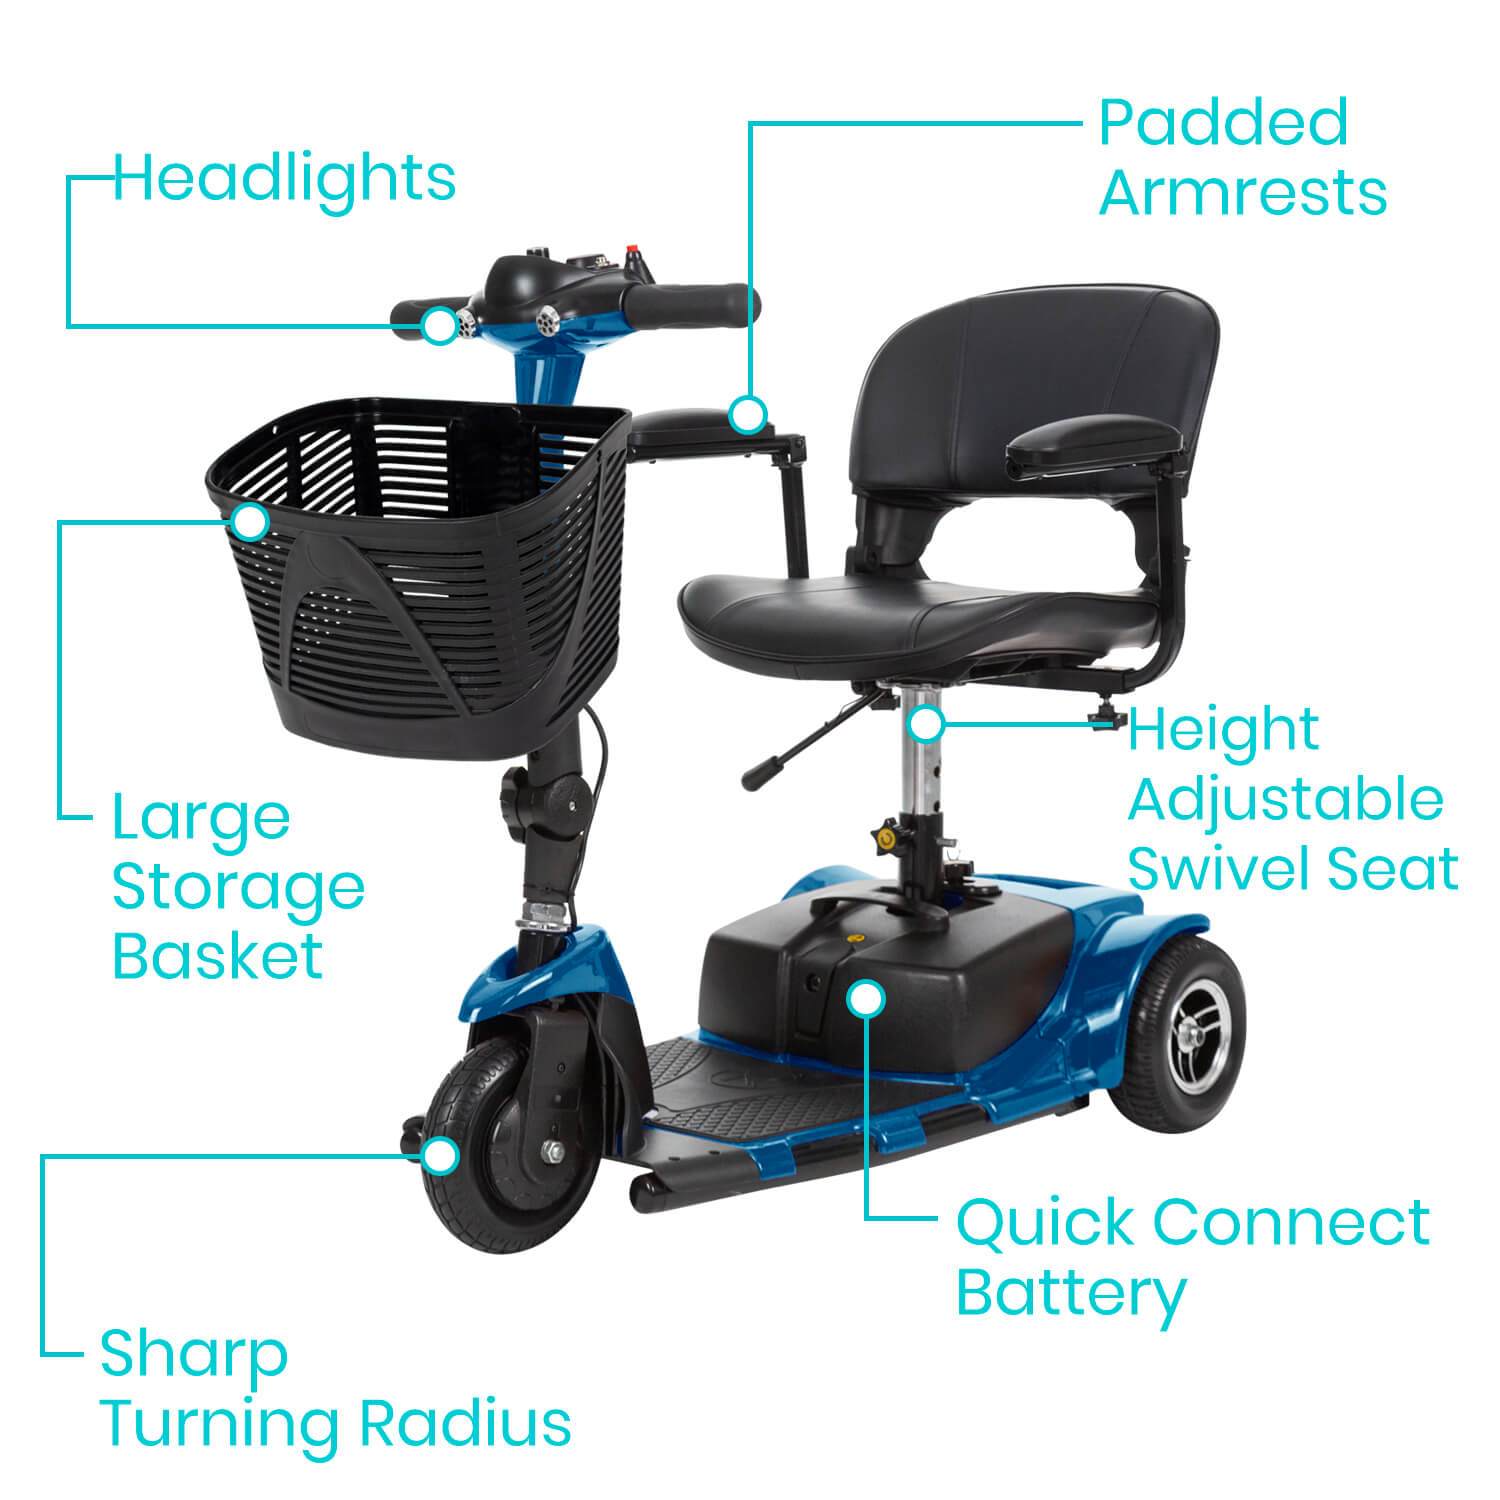 Vive Health - 3 Wheel Mobility Scooter, 12.4 Miles Range, 265lbs Weight Capacity